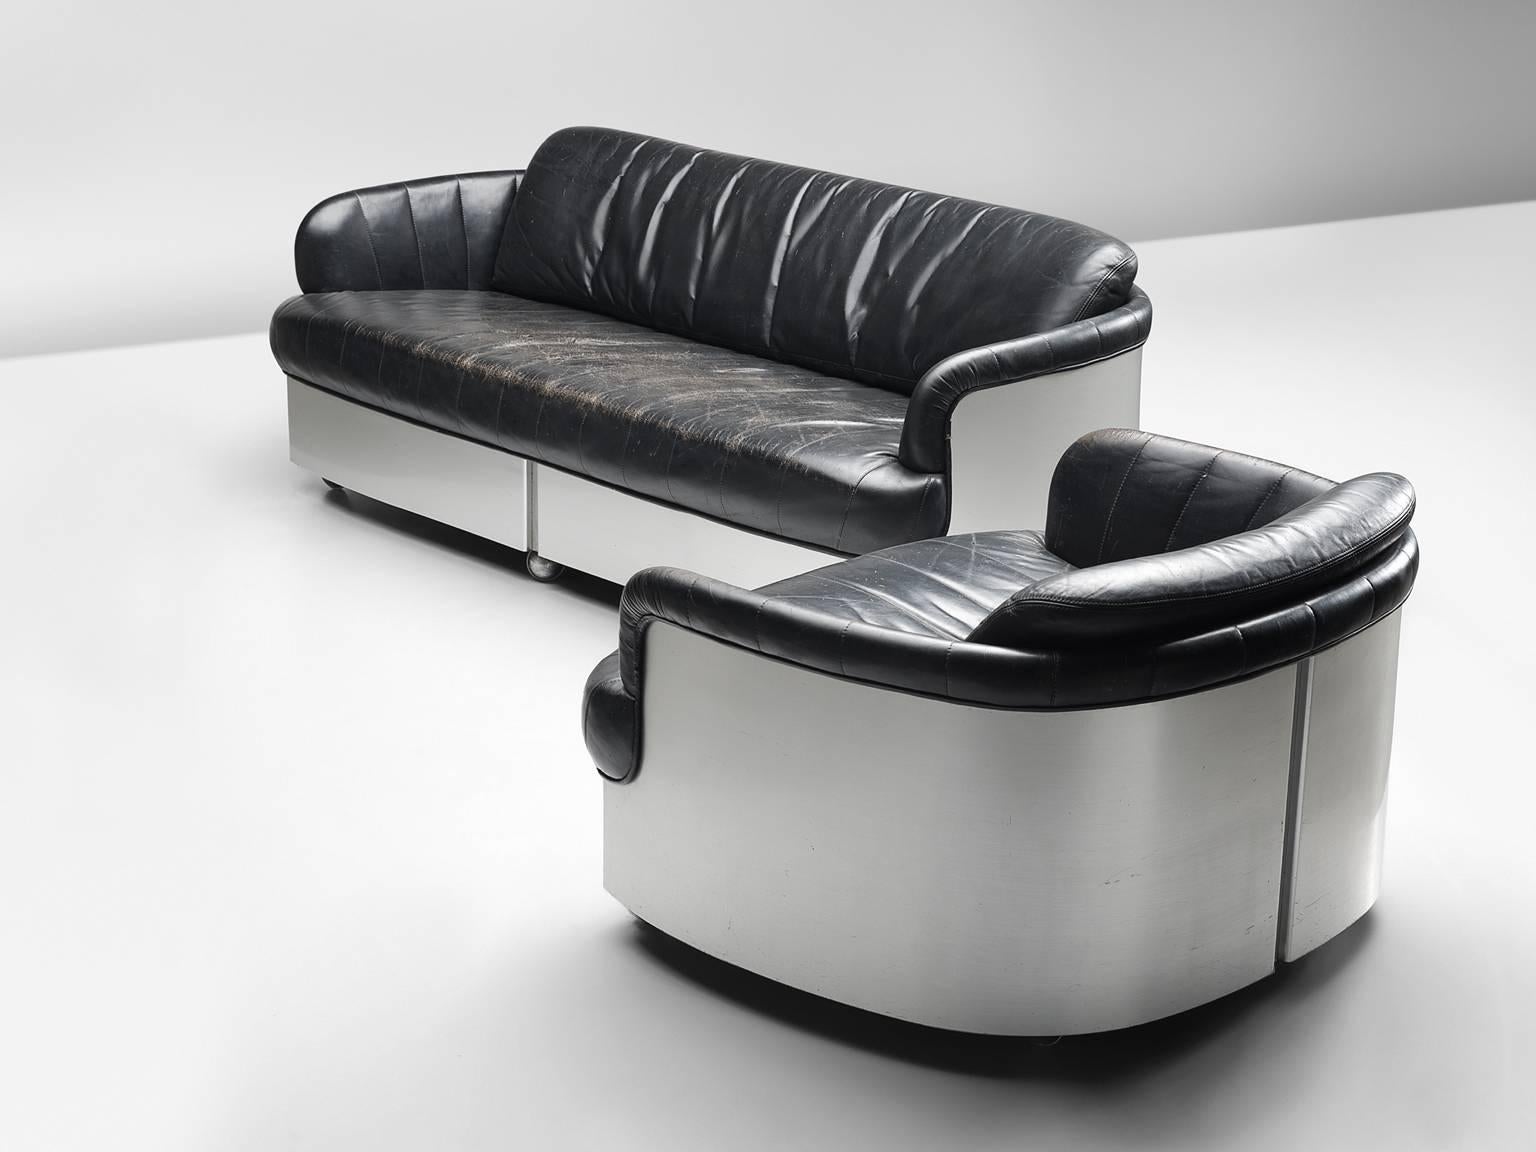 Sofa by Durlet, 'Patina' model, in leather and chrome, Belgium, 1970s. 

Sturdy and highly comfortable three-seat sofa and combined lounge chair. This slick and comfortable lounge set is executed with black leather and chromed steel. The rounded